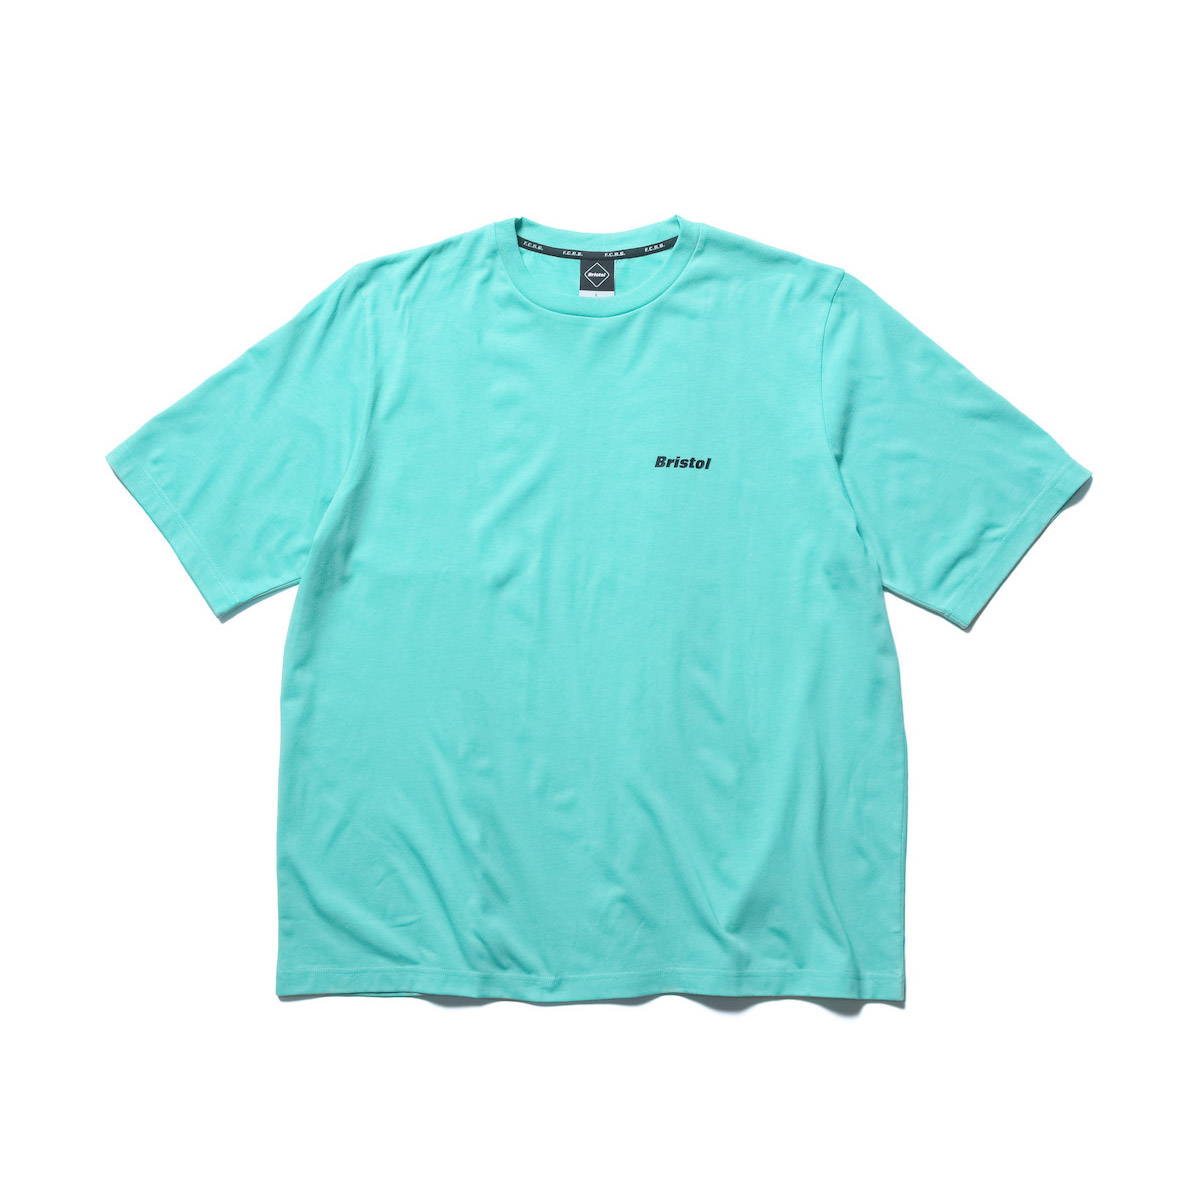 F.C.Real Bristol / RELAX FIT SMALL AUTHENTIC LOGO TEE (Light Blue)